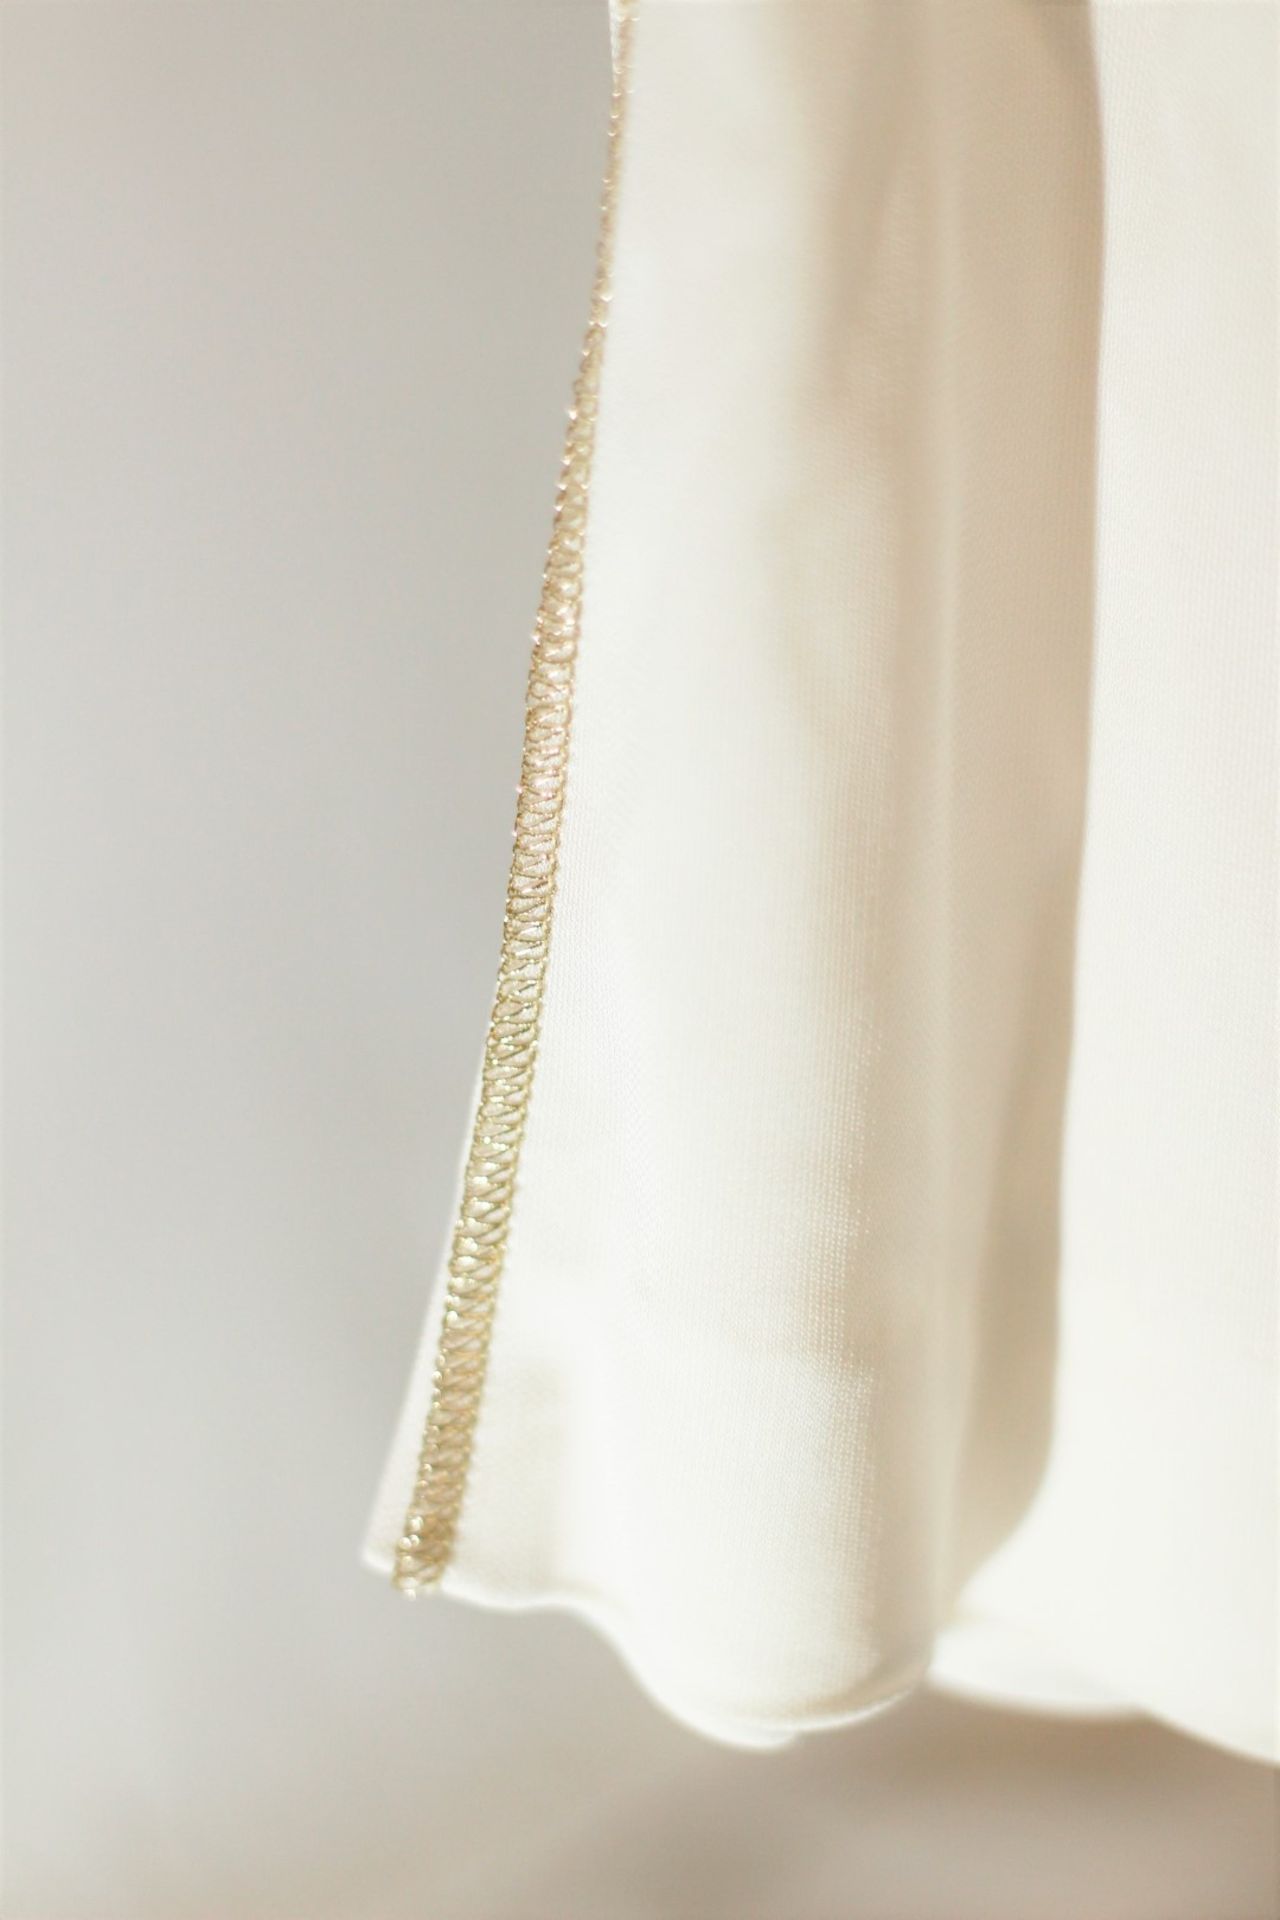 1 x Alberta Ferretti White Trousers - Size: 16 - Material: 100% Rayon - From a High End Clothing - Image 5 of 6